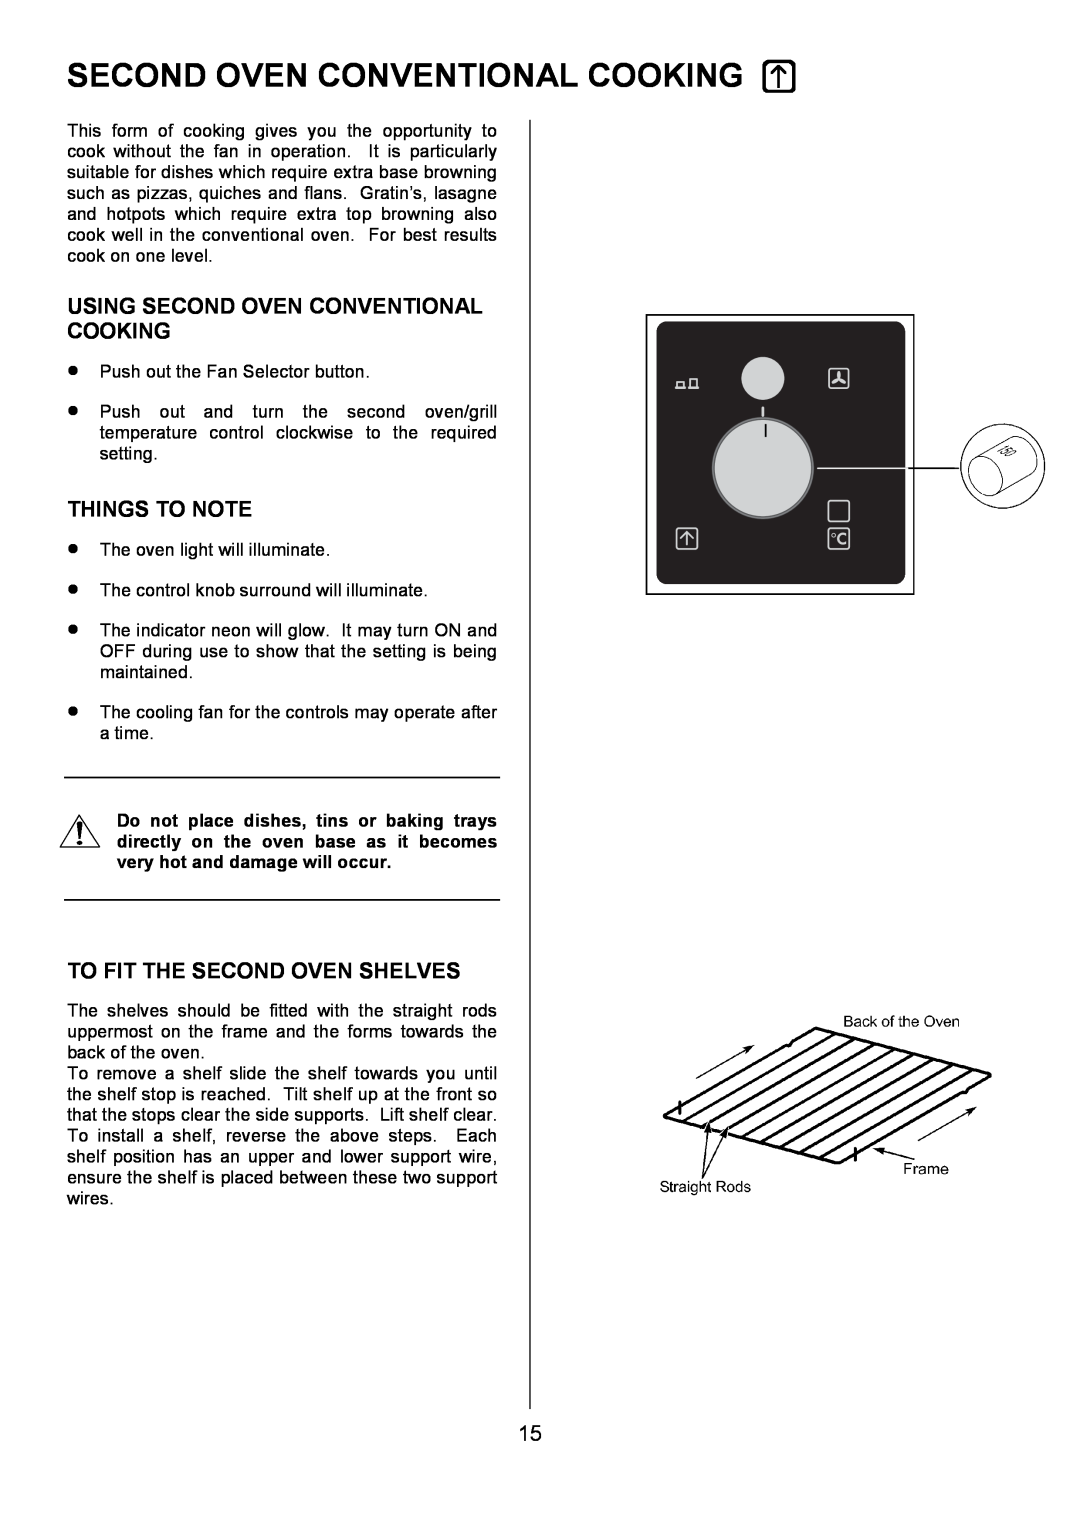 AEG 311704300, U7101-4 manual Using Second Oven Conventional Cooking, Things To Note, To Fit The Second Oven Shelves 